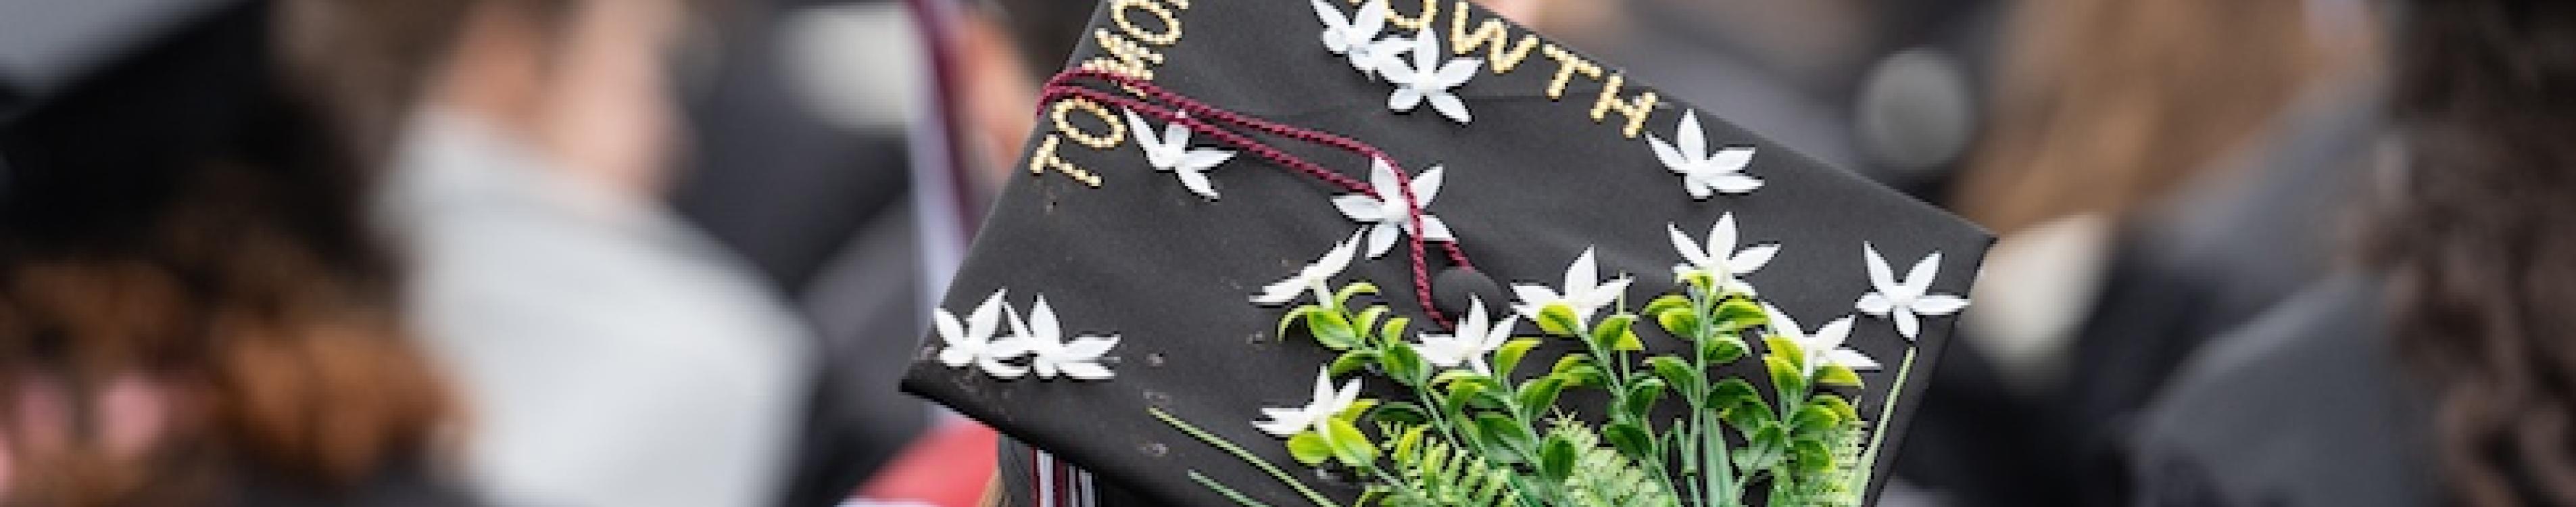 A graduation cap is seen with flowers decorating the top and the words "More to Grow" on the top. 